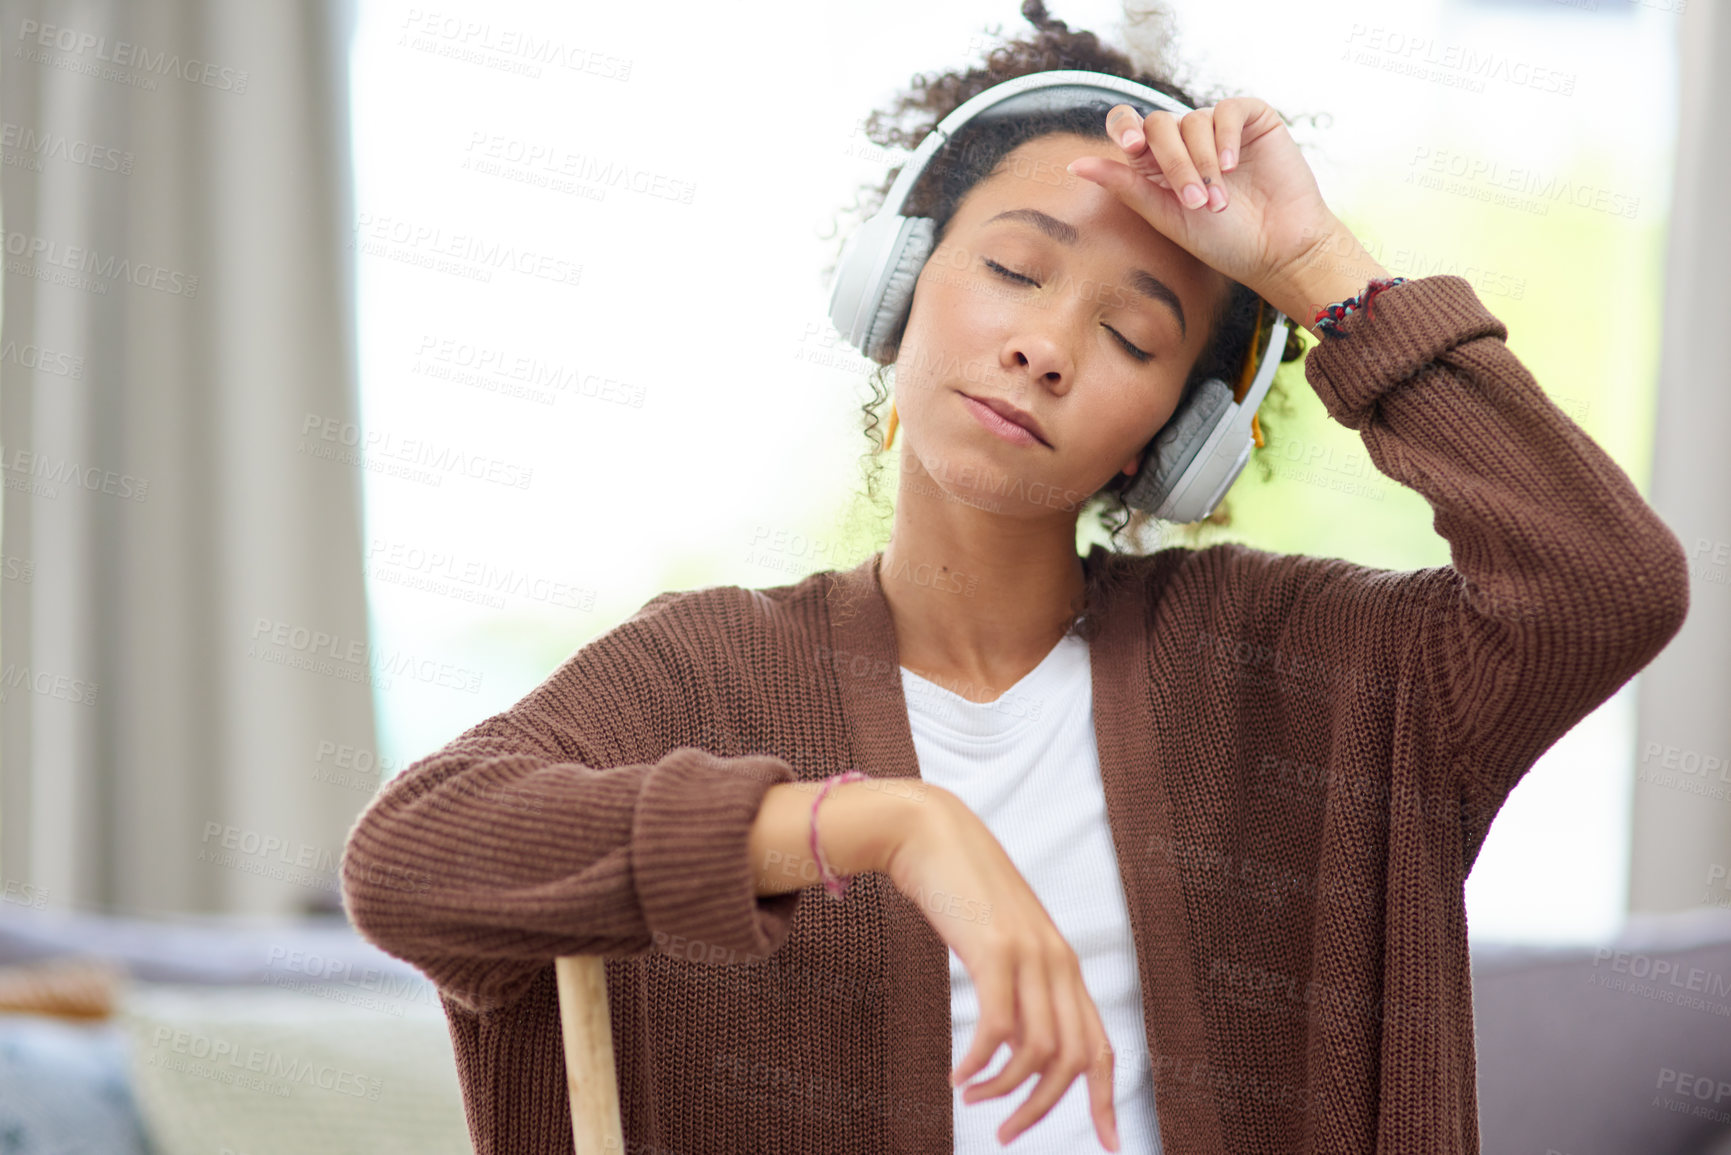 Buy stock photo Shot of a woman wearing headphones and looking exhausted after cleaning her house